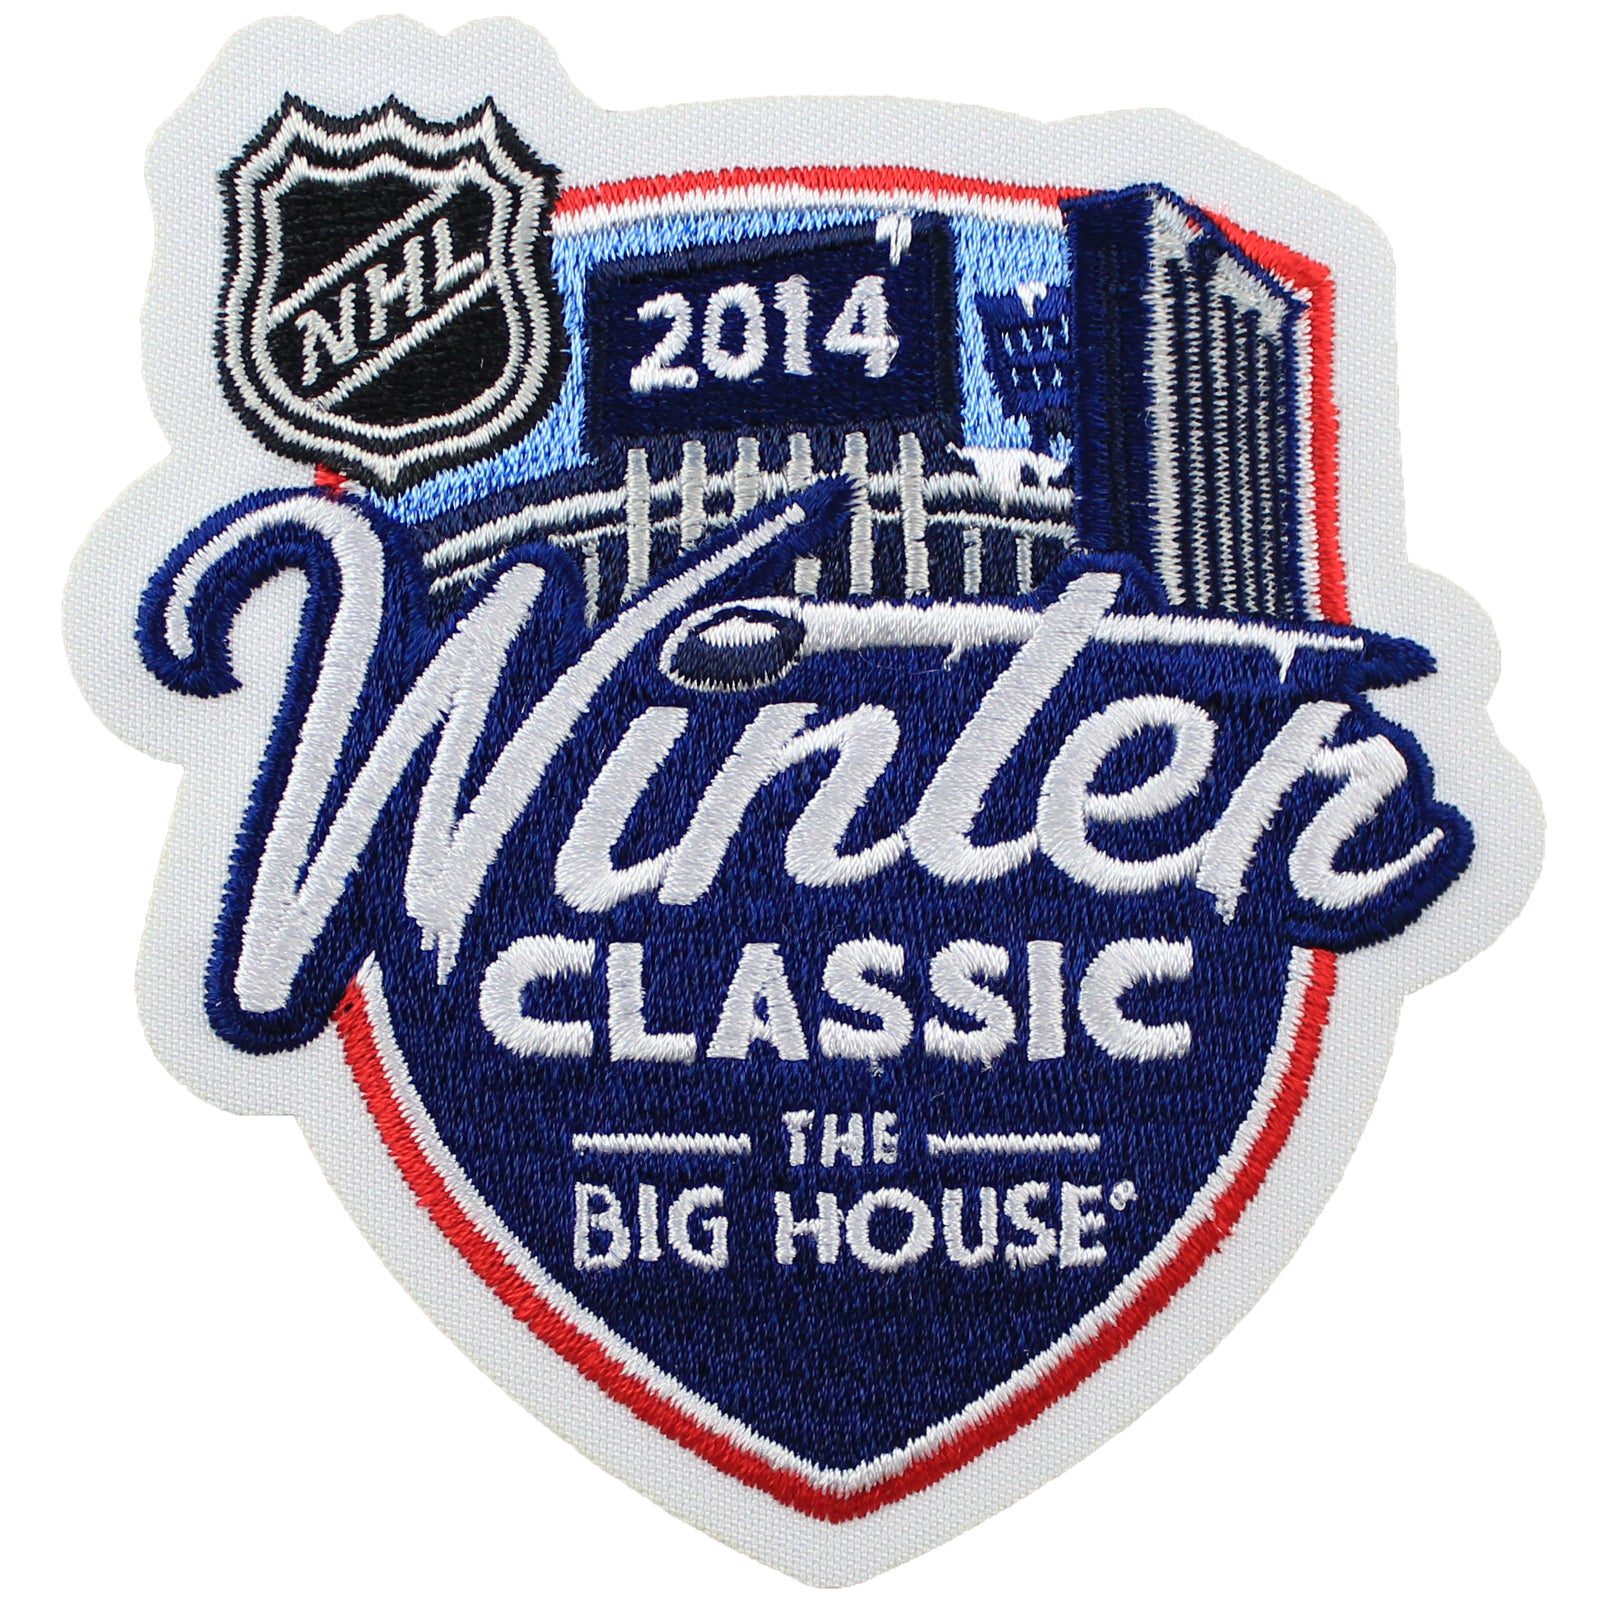 Red Wings beat Hawks at Winter Classic